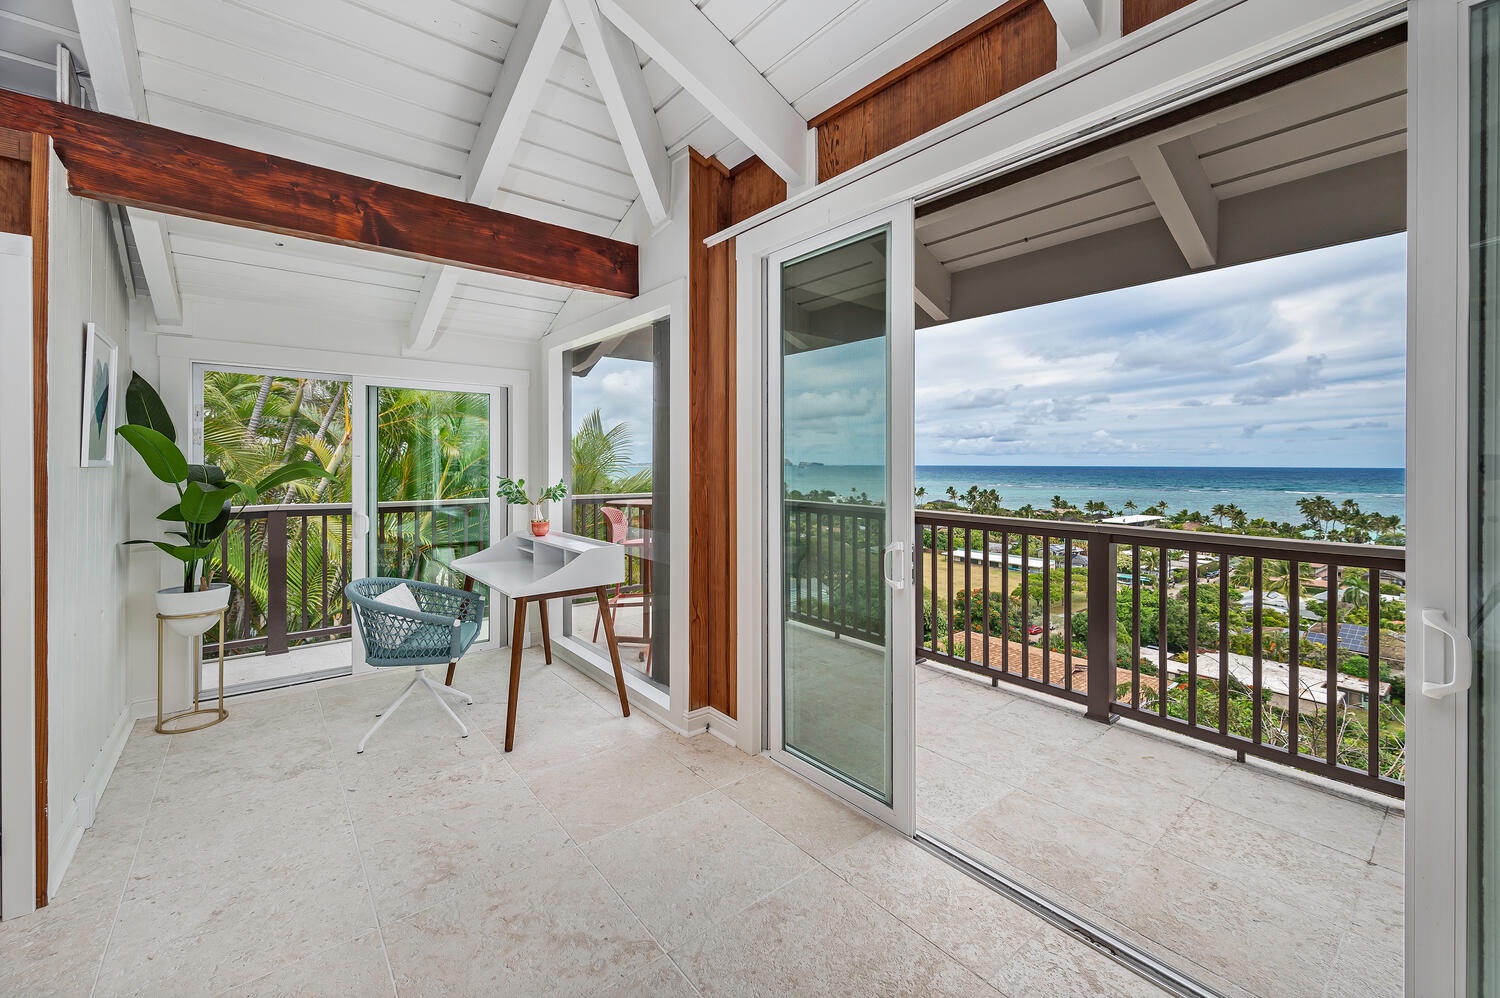 Kailua Vacation Rentals, Hale Lani - Primary bedroom has office space and spacious lanai with sweeping views